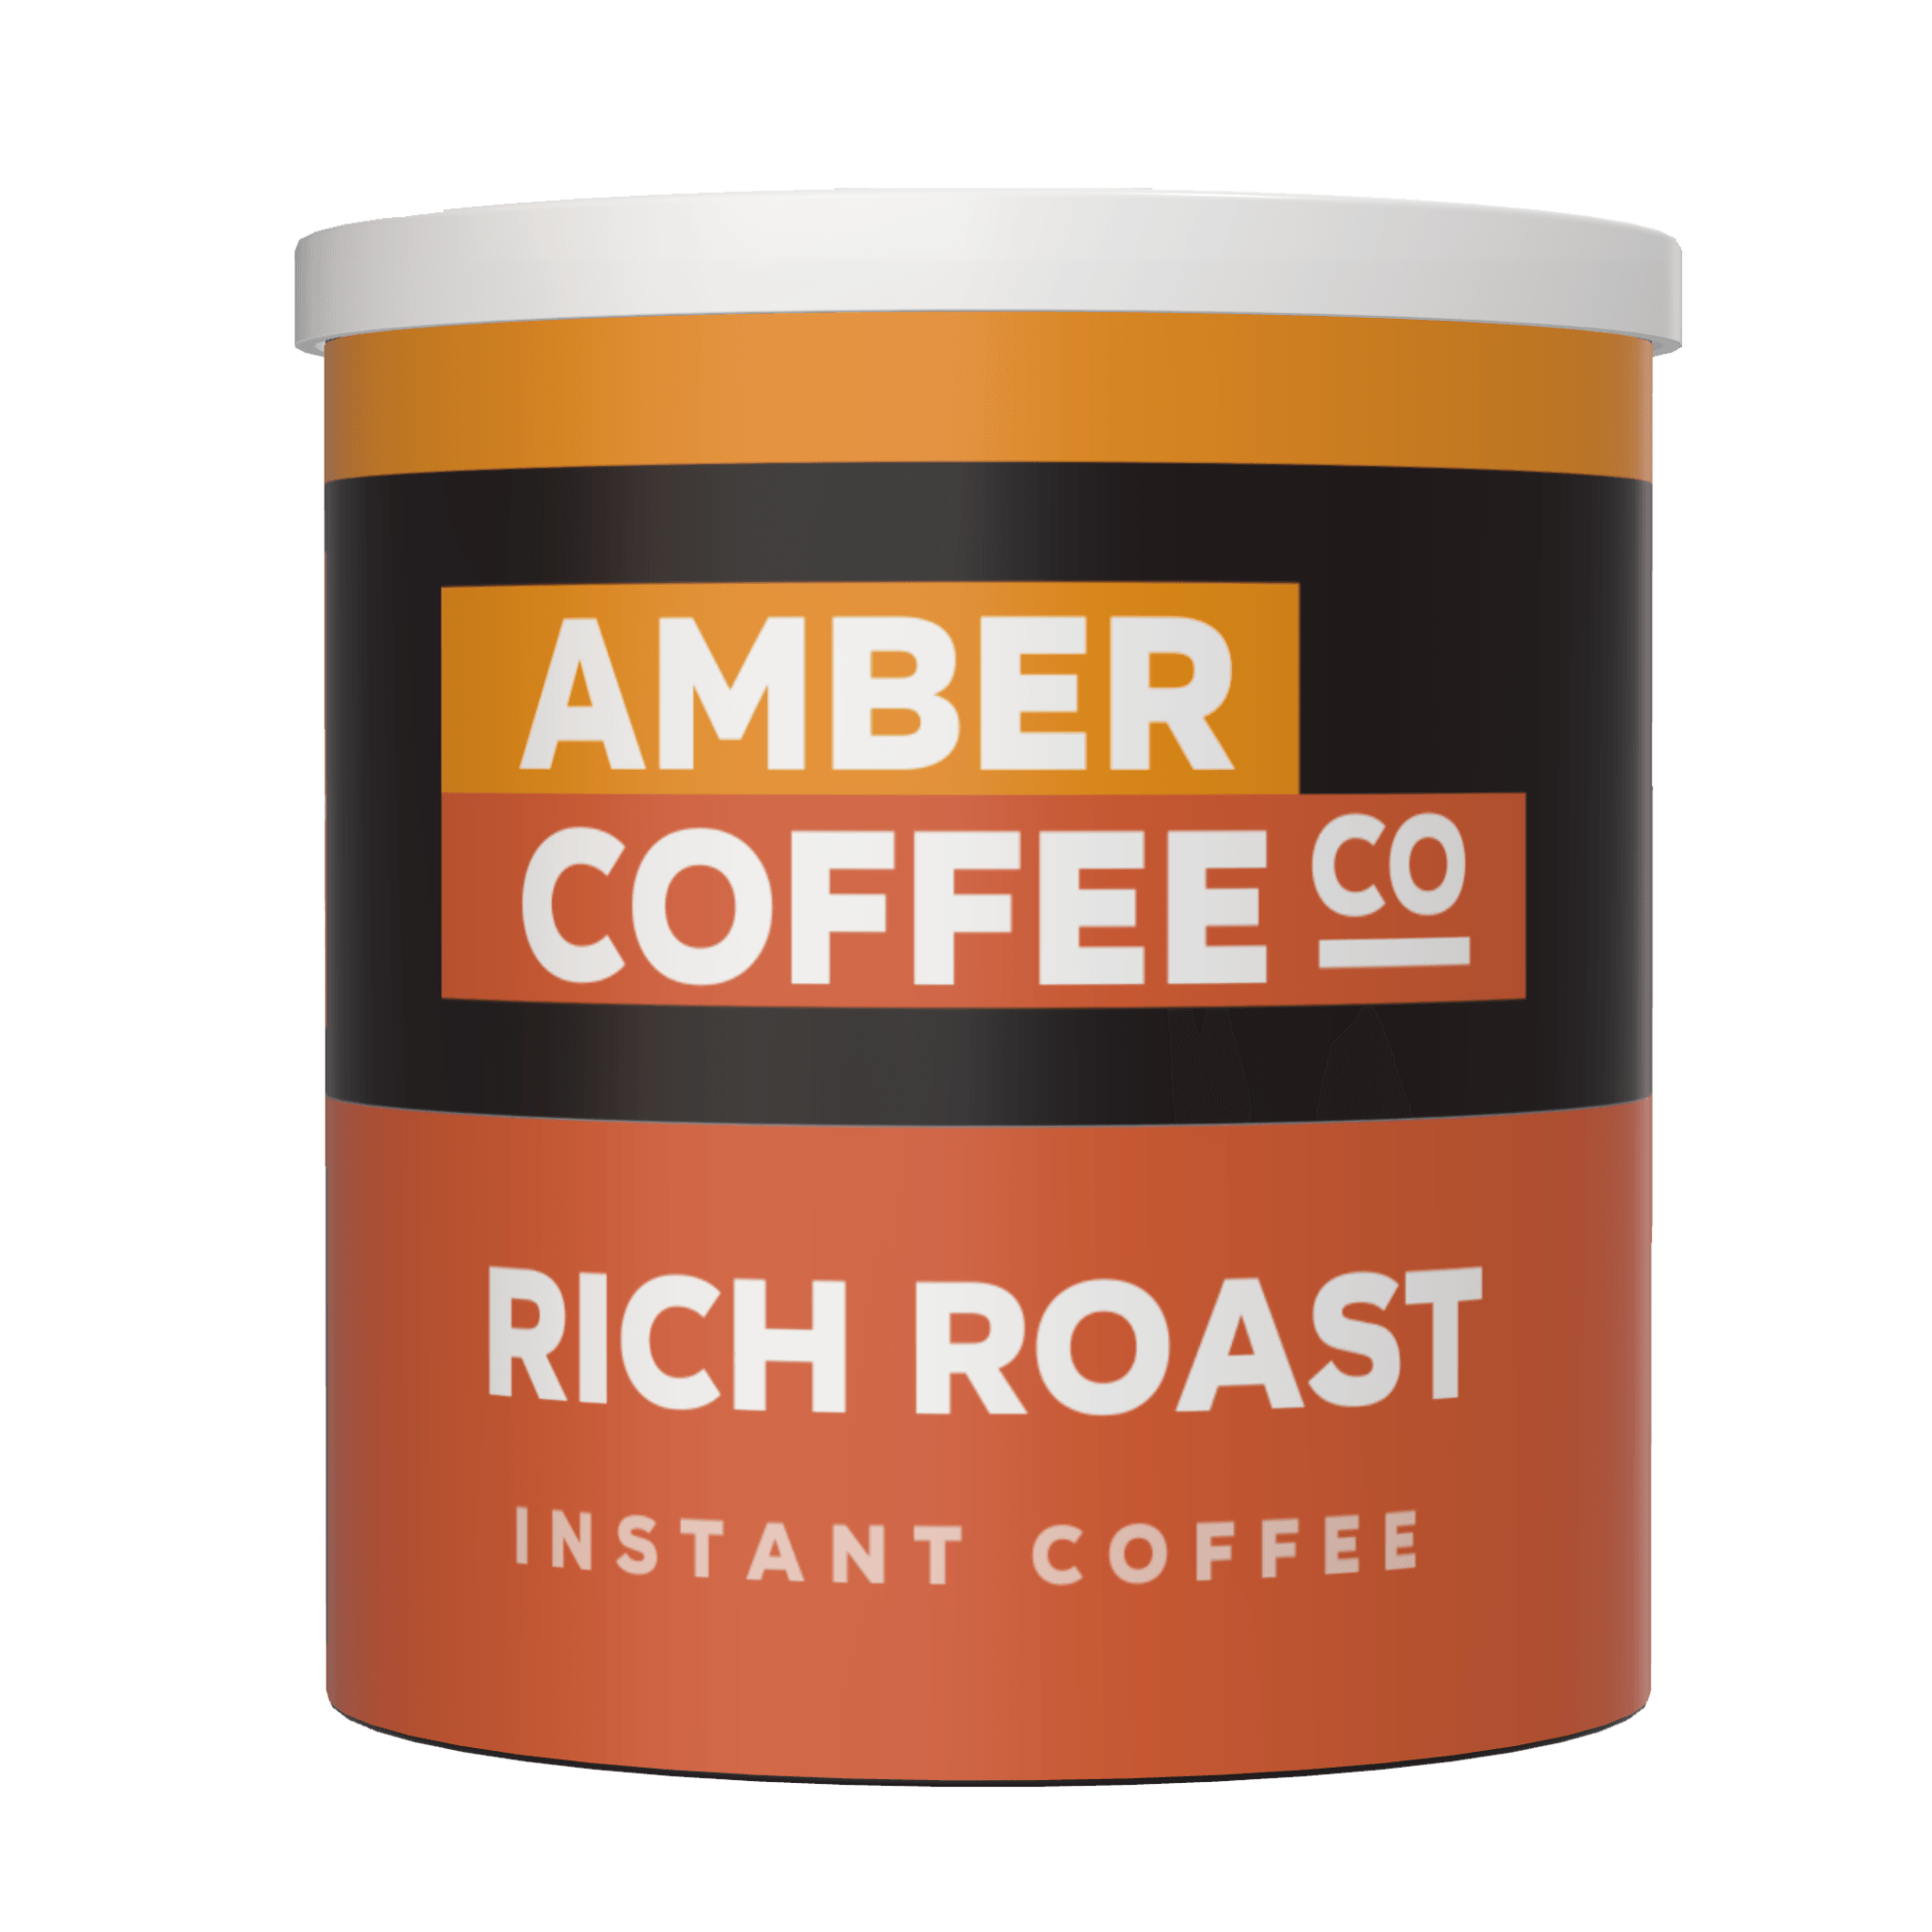 Amber Coffee Co Rich Roast Blend: Granulated Coffee Tin 750g (Ideal for the workplace) - Vending Superstore